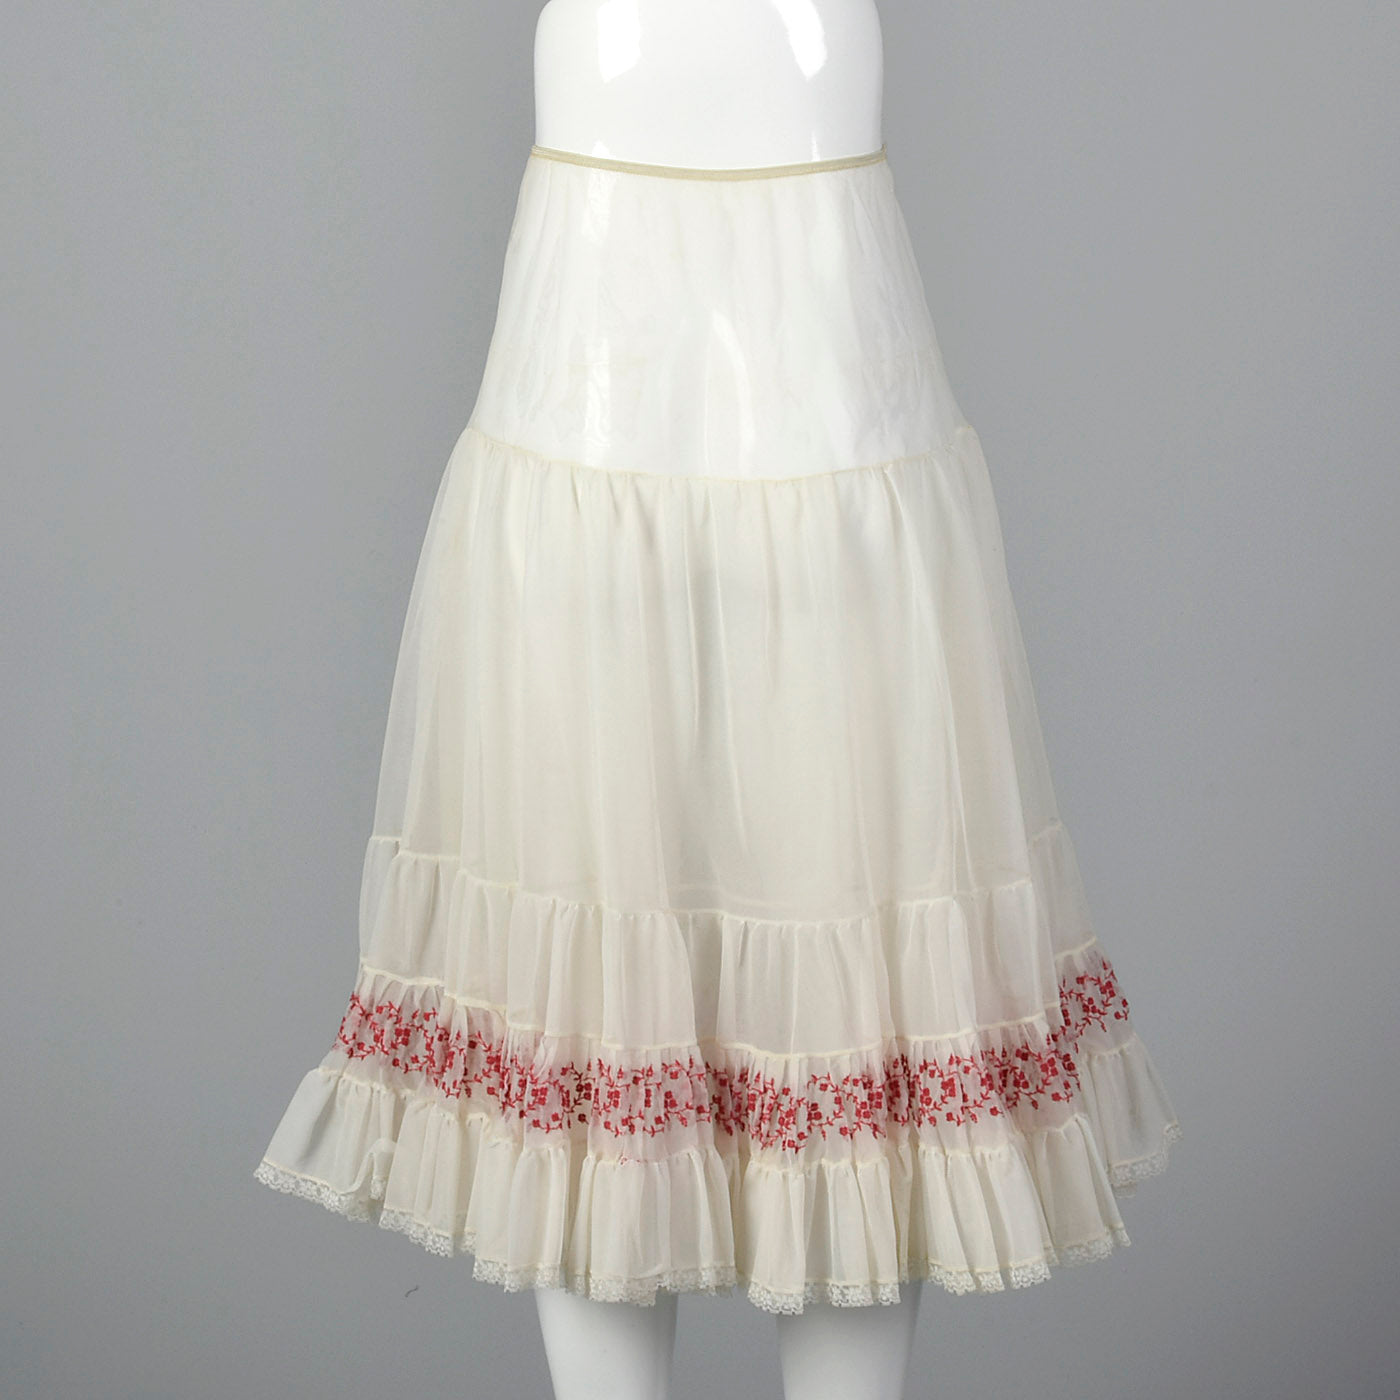 1950s White Half Slip with Red Embroidery